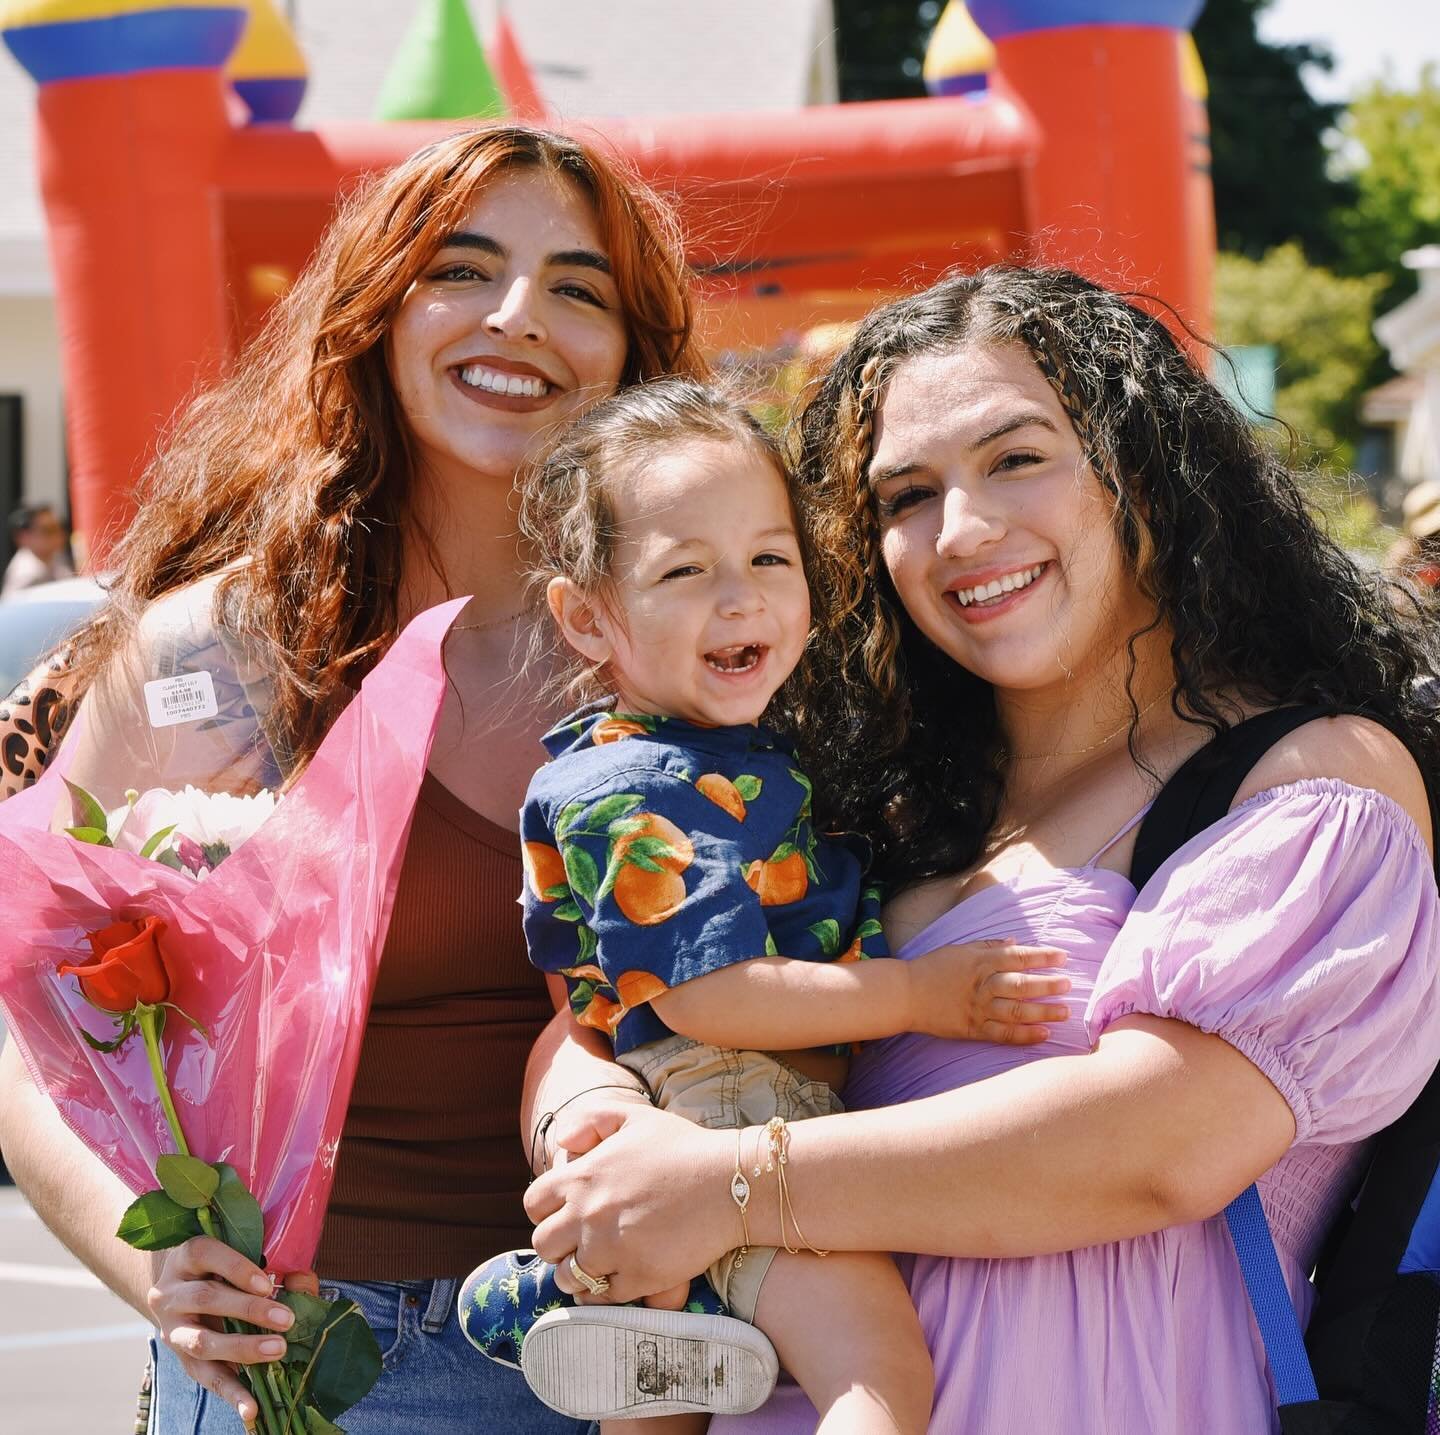 💐 If you&rsquo;re a mom, grandma, step-mama, or a mother figure, thank you for all that you do in your family, community, and world. We&rsquo;re excited to celebrate you!

&middot;  Special EDEN Kids Song Performance 
&middot;  Flower Bouquet Bar
&m